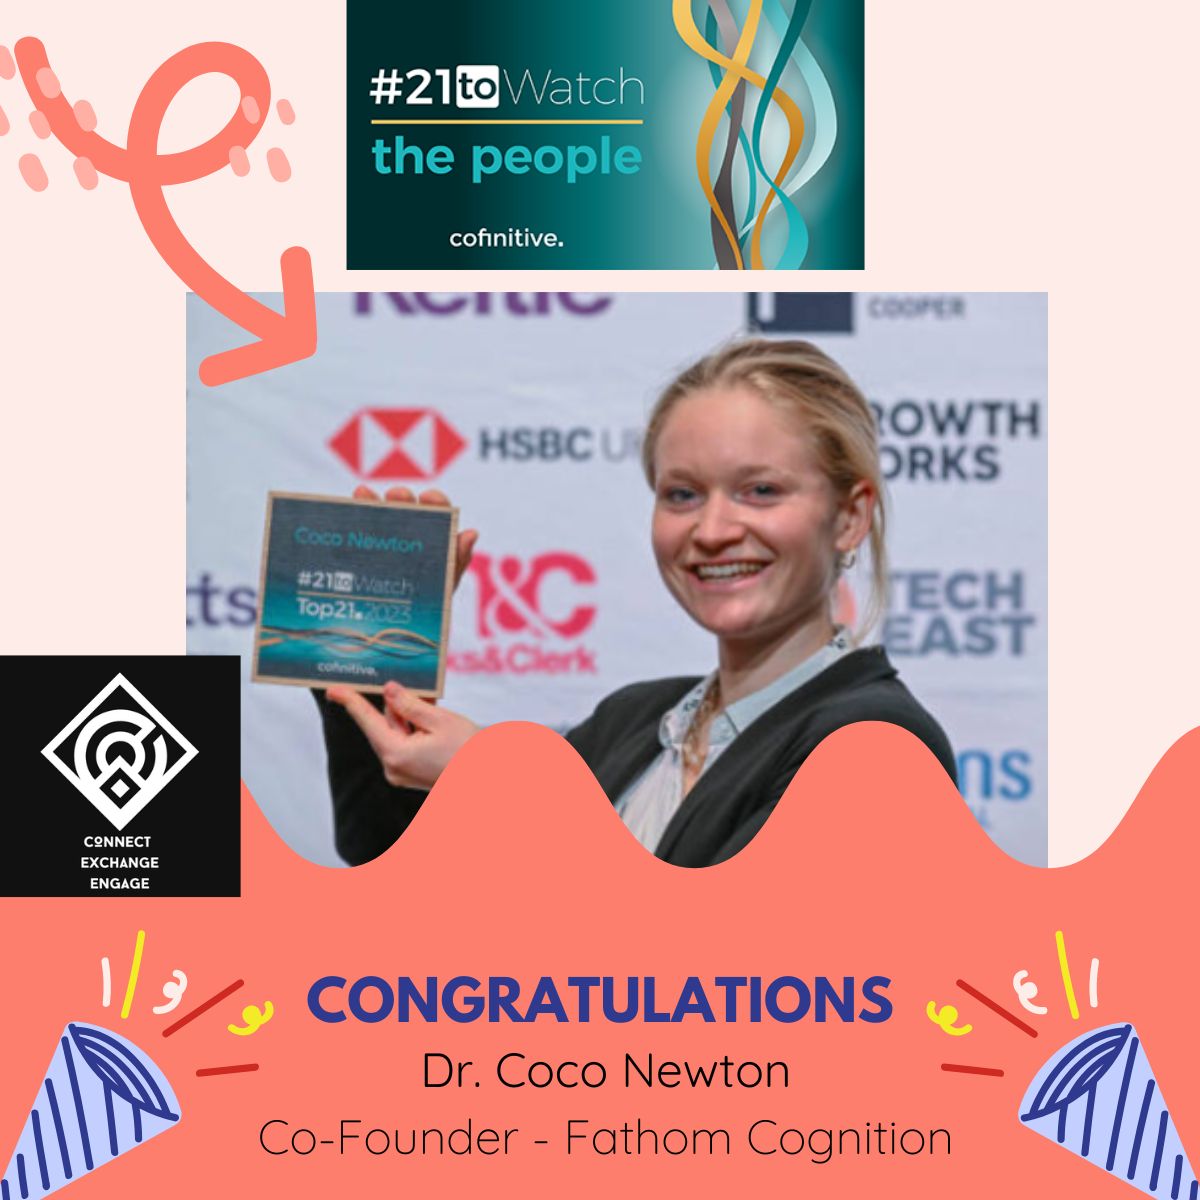 Many congratulations to @newt_cc , fellow Conexer, who made it to the 2023 People to Watch on the #21toWatch list of @confinitive. Coco is a neuroscientist and Co-founder of  Fathom Cognition creatign new cognitive markers that can help detect Alzheimer's disease earlier.